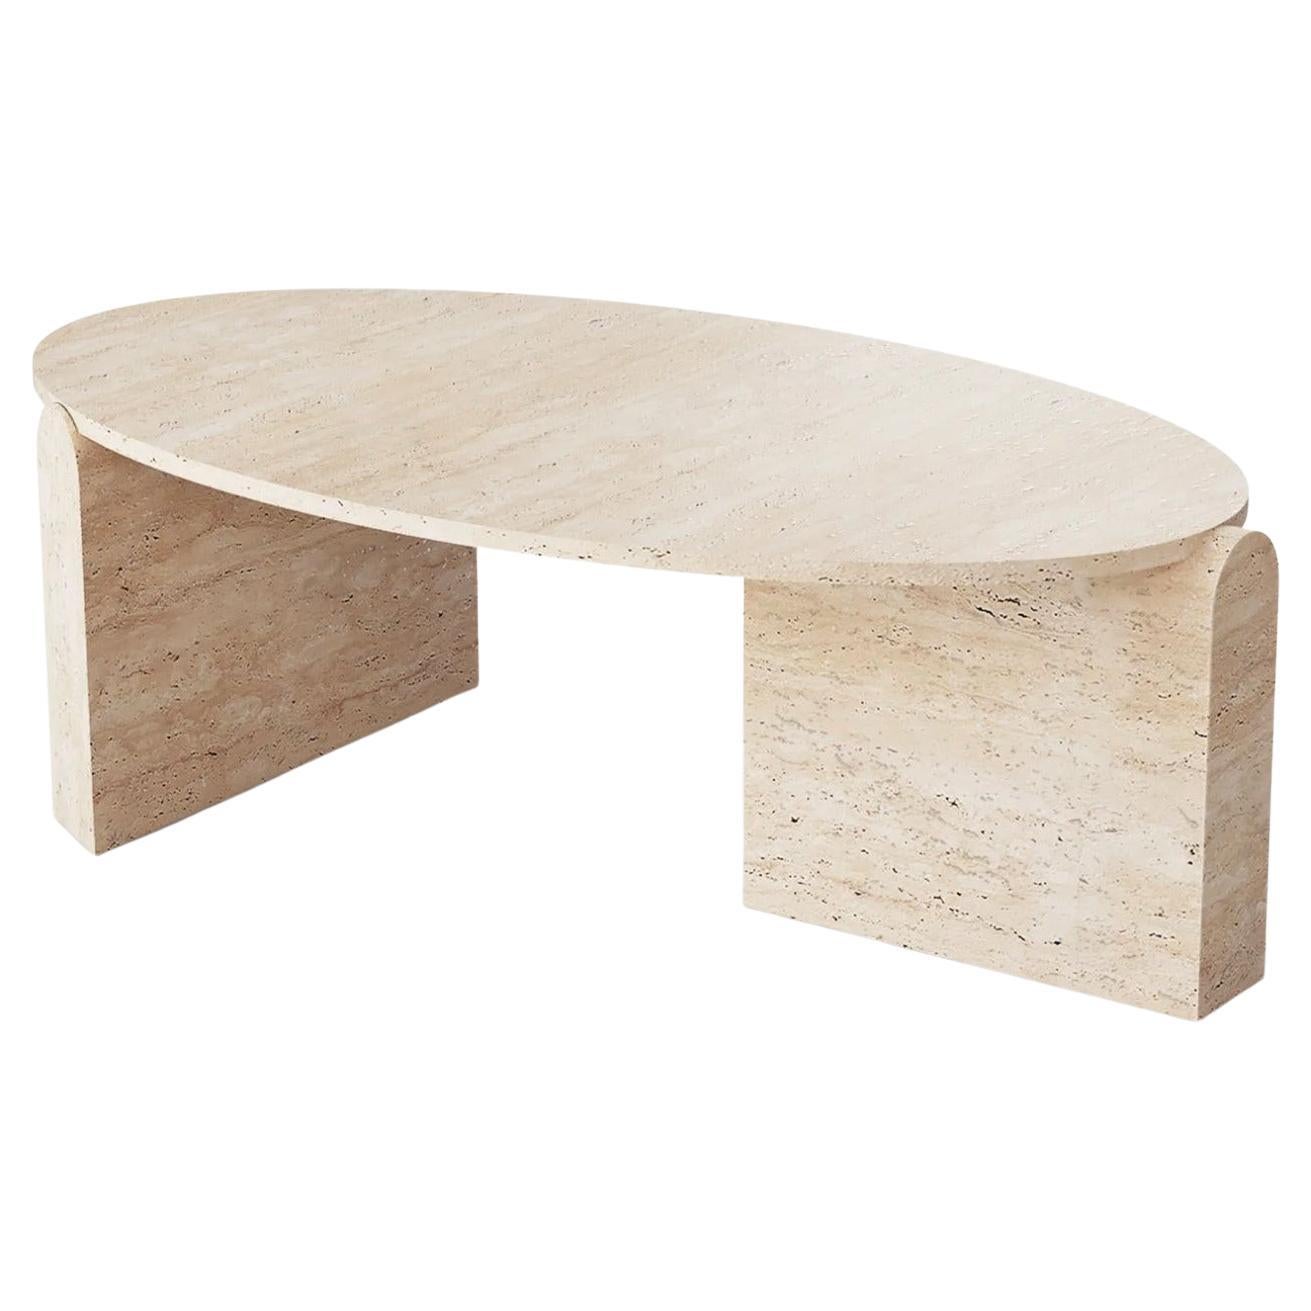 Organic Modern Center Table Jean in Natural Travertine Marble Stone